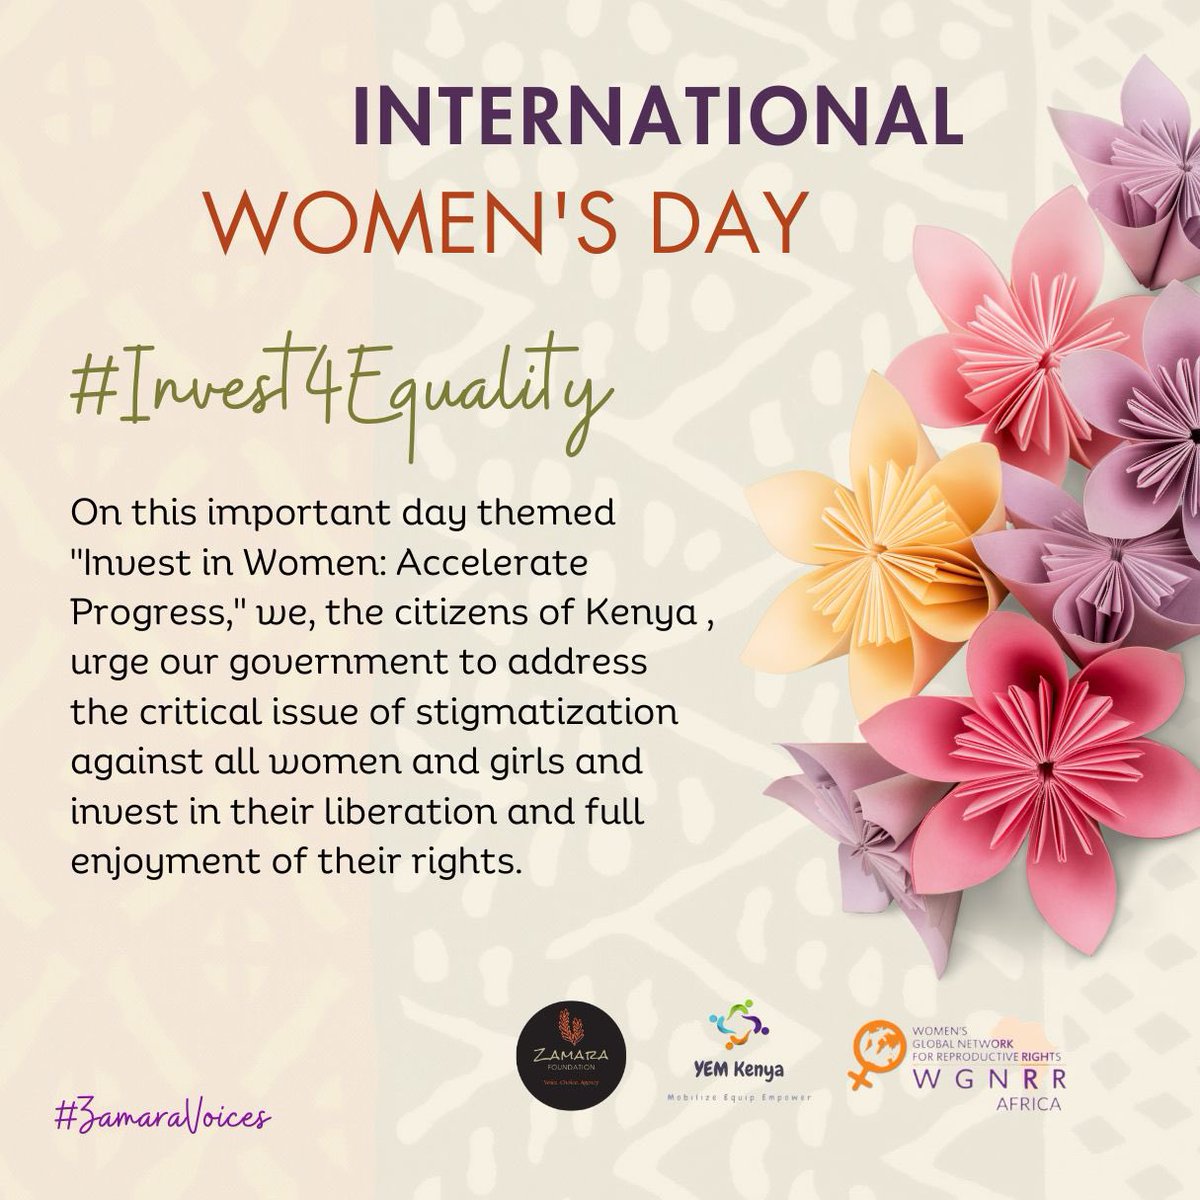 Let us endeavor to put in place structural and systemic reforms to ensure gender equality and equity. Let's dismantle barriers, challenge norms and create a world where every woman and girl can thrive. #Invest4Equality #ZamaraVoices #InternationalWomensDay @Zamara_fdn @YEMKenya